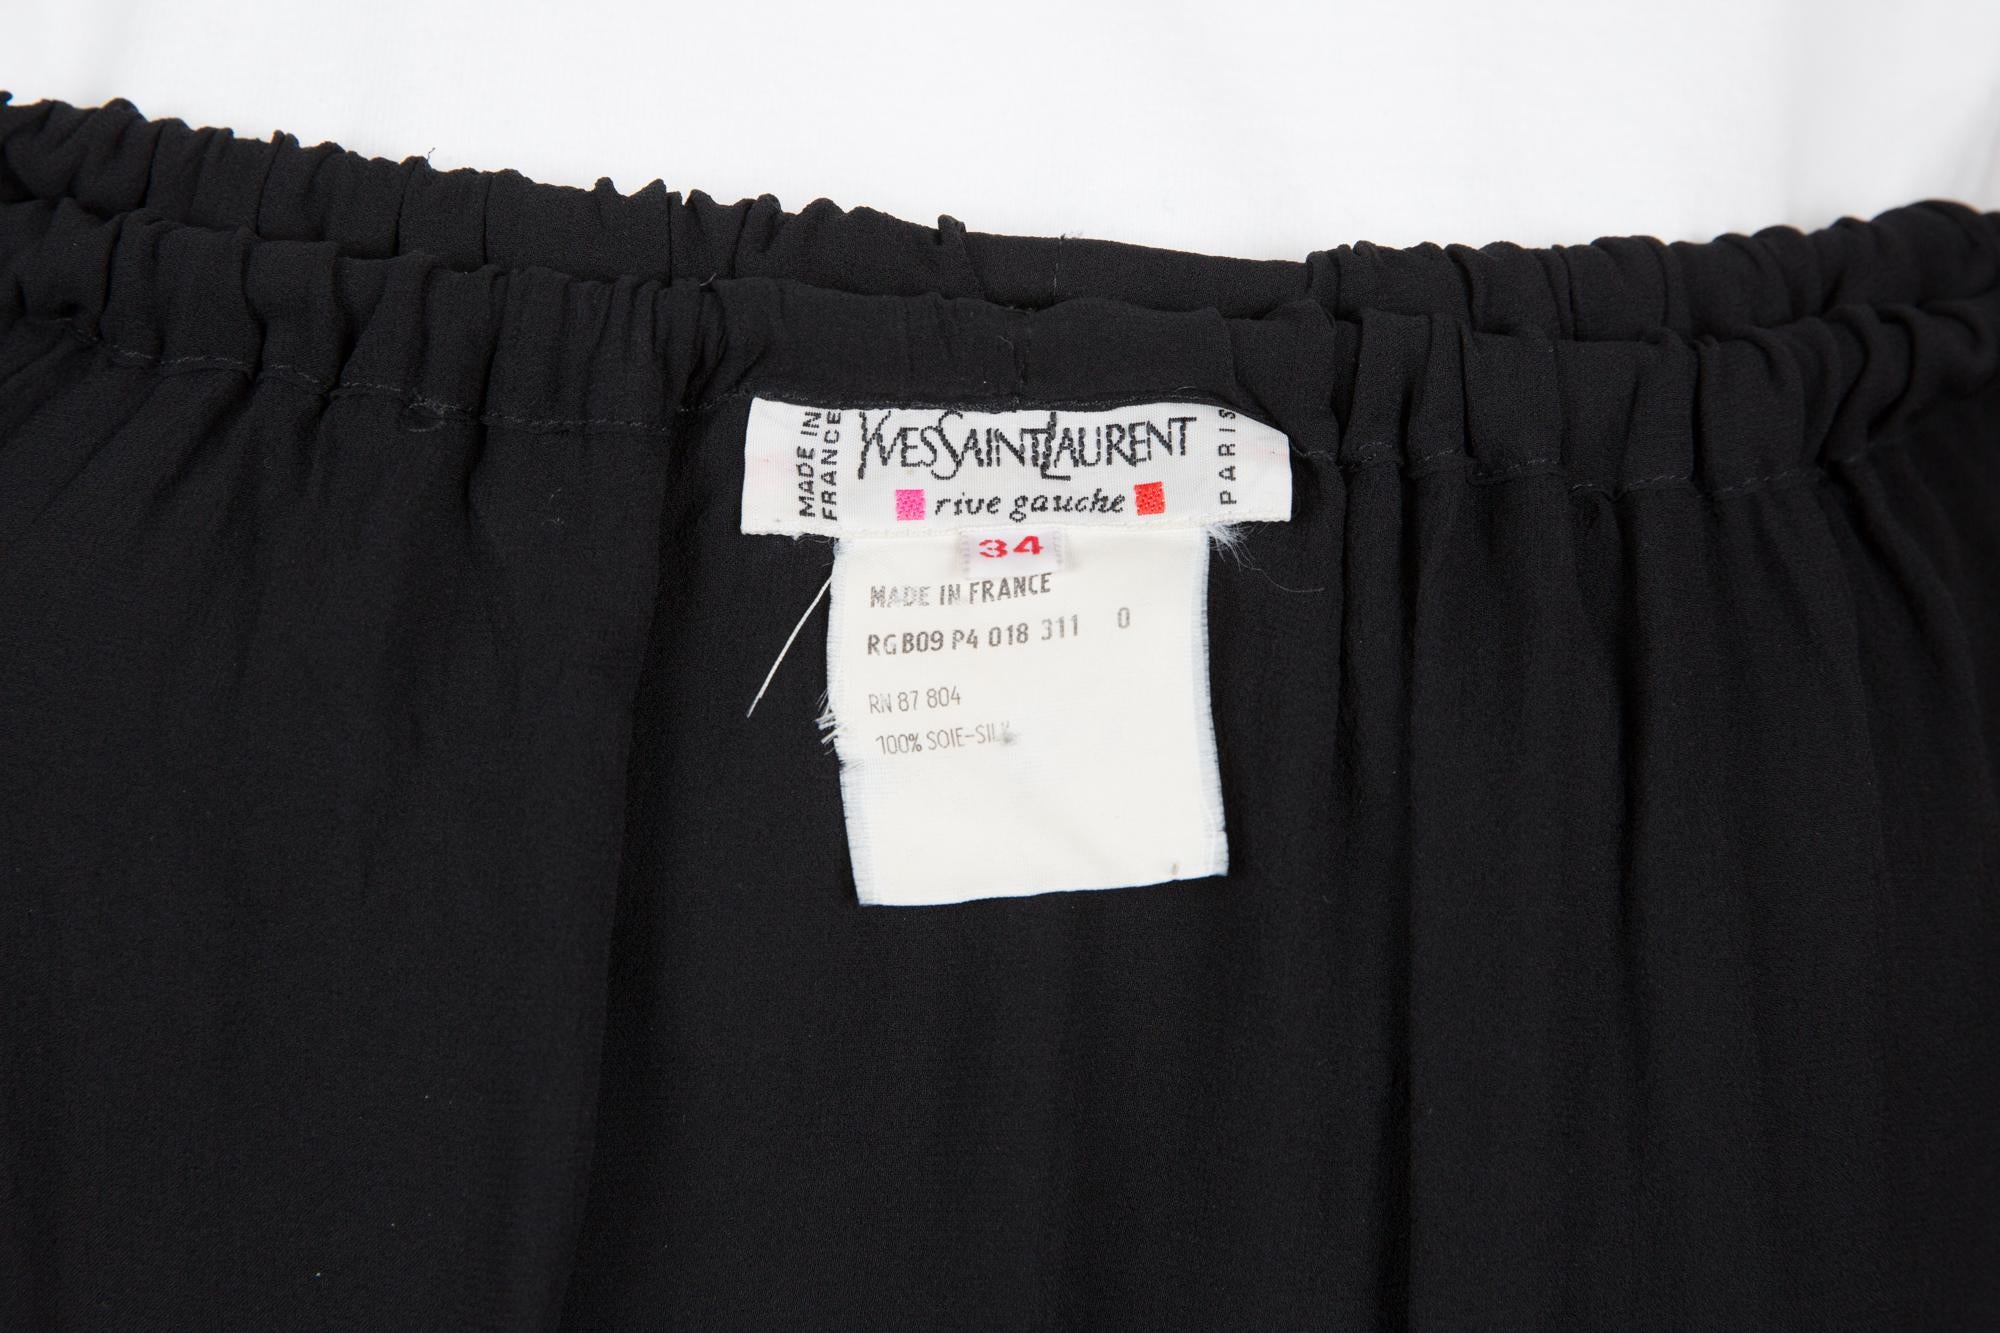 YSL Yves Saint Laurent black evening silk skirt featuring a high-waisted skirt, asymmetrical semi-sheer draping, elastic waistband. 
Composition: 100% Silk 
Estimated size 34fr/US2 /UK6
In good vintage condition. Made in France.
Circa 1990s
We